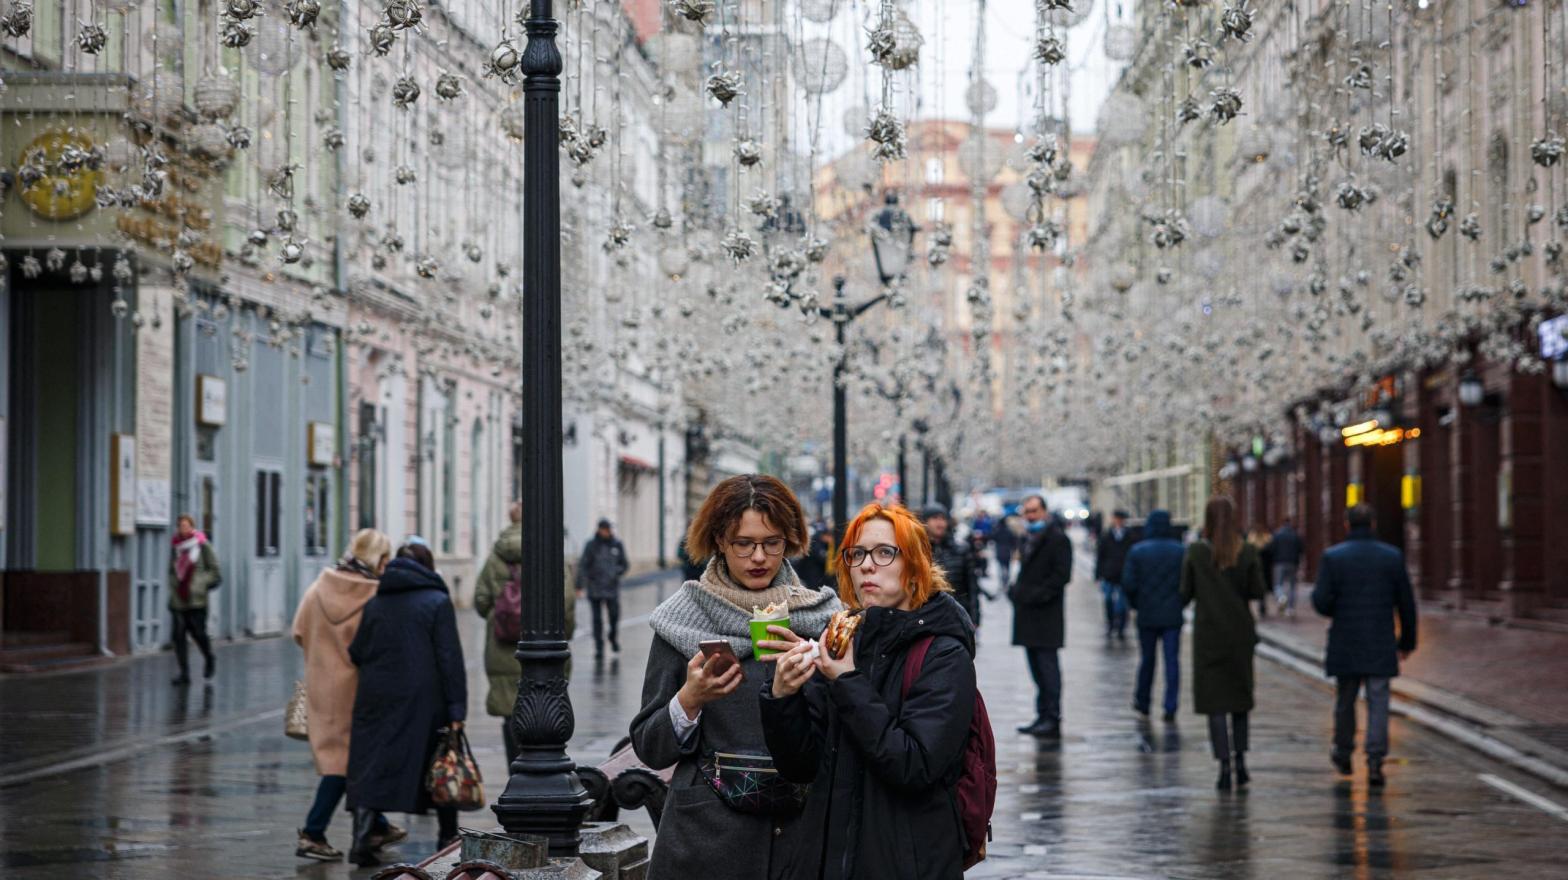 People have lunch on Nikolskaya Street amid the outbreak of the covid-19 pandemic in Moscow on October 28, 2021. (Photo: Dimitar Dilkoff / AFP, Getty Images)